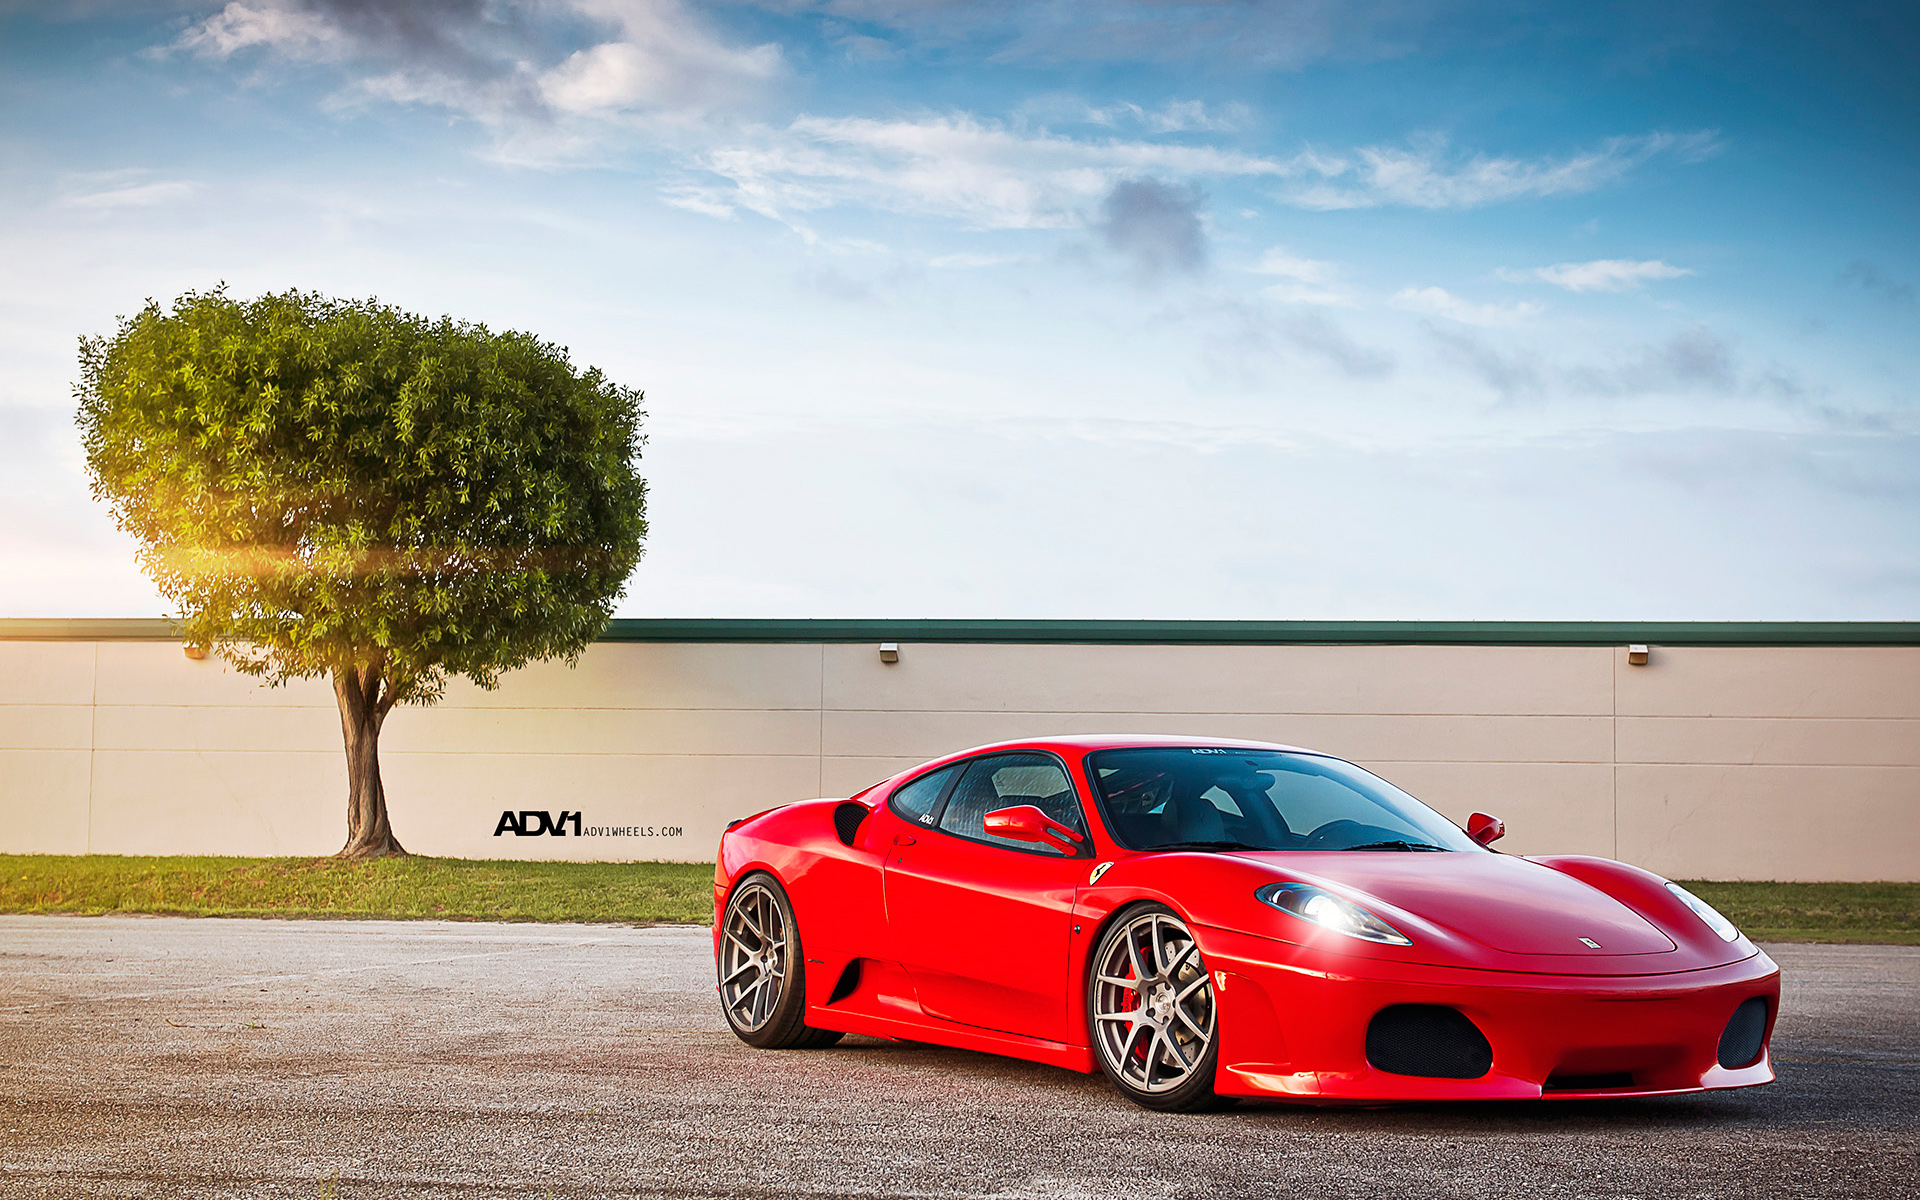 Ferrari F430 Wallpapers and Background Images   stmednet